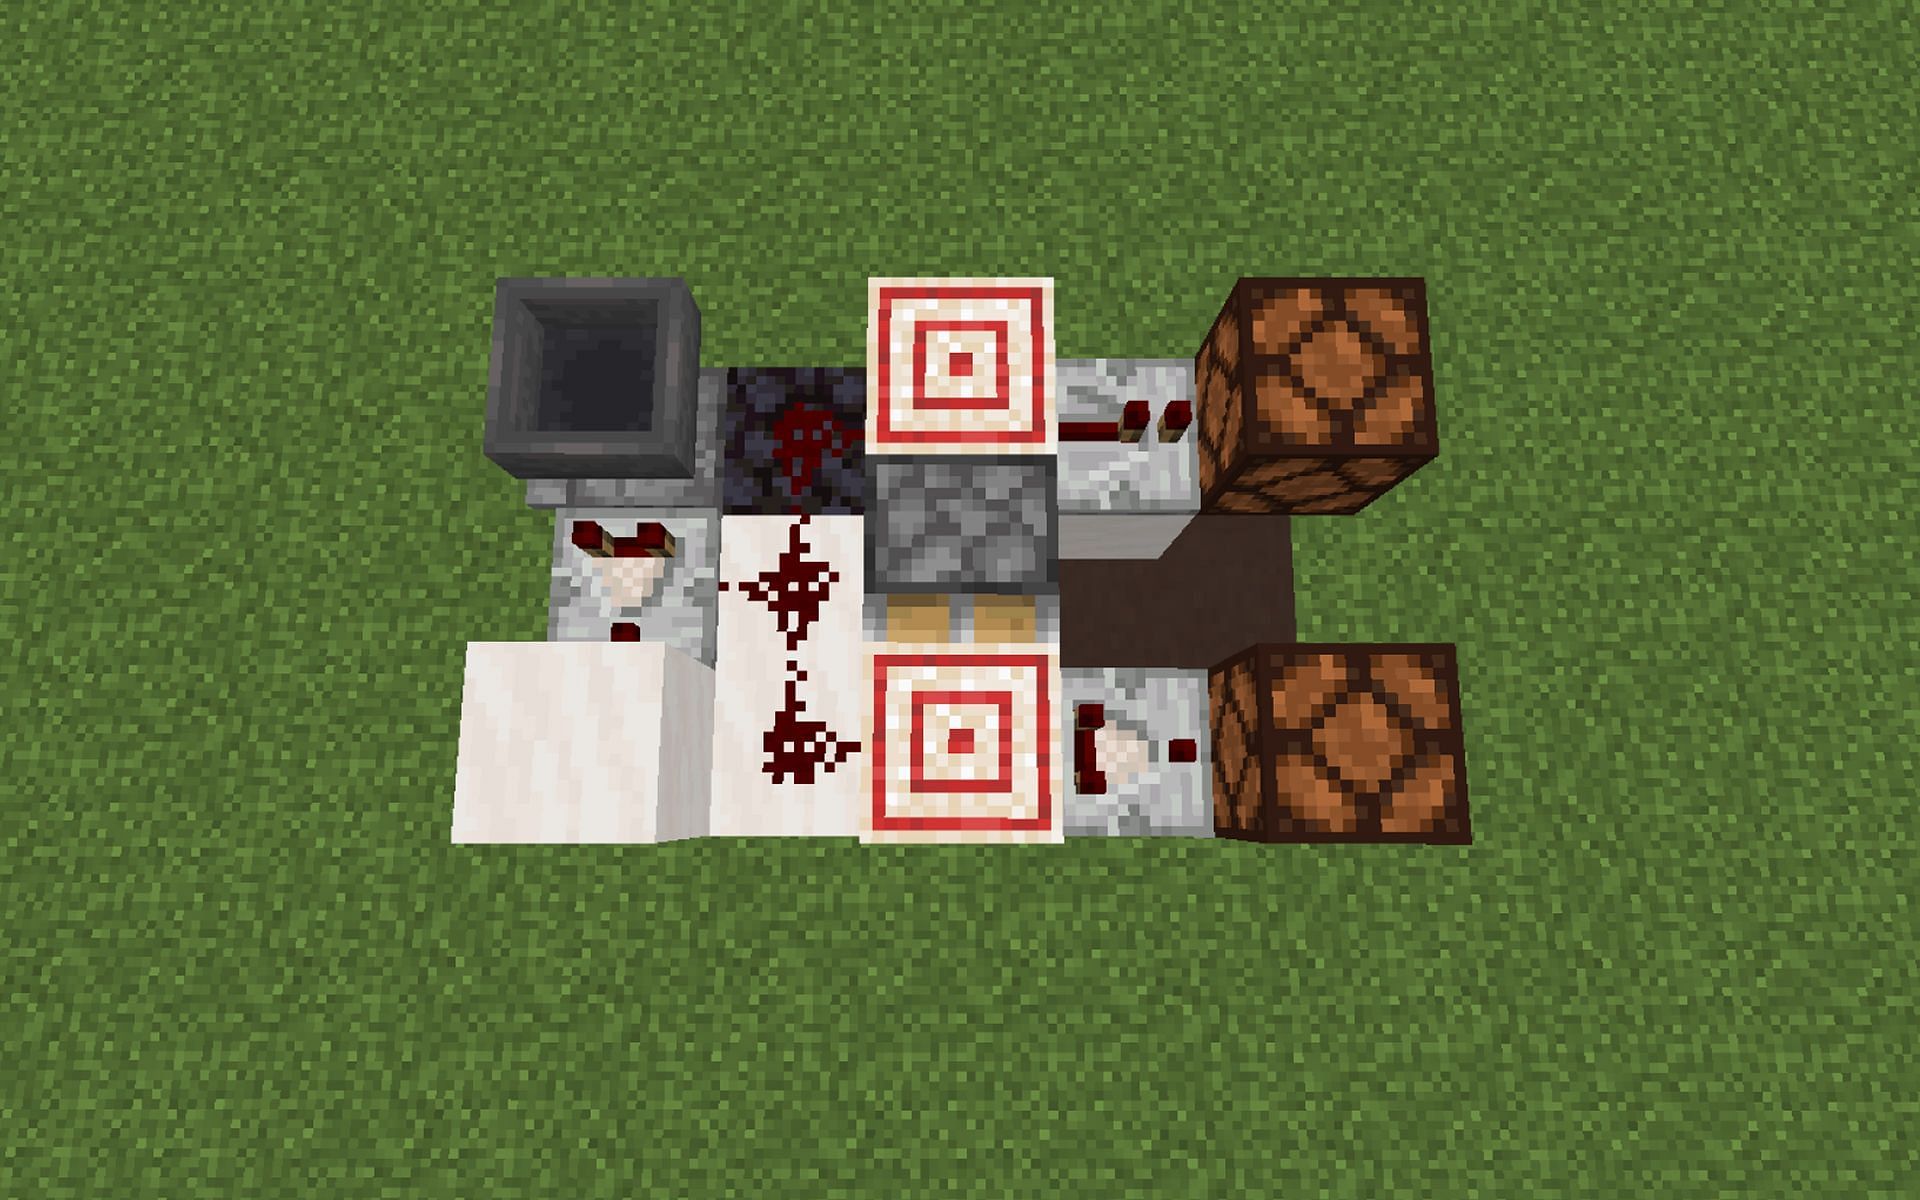 An image of a completed randomizer circuit in-game. (Image via Minecraft.)